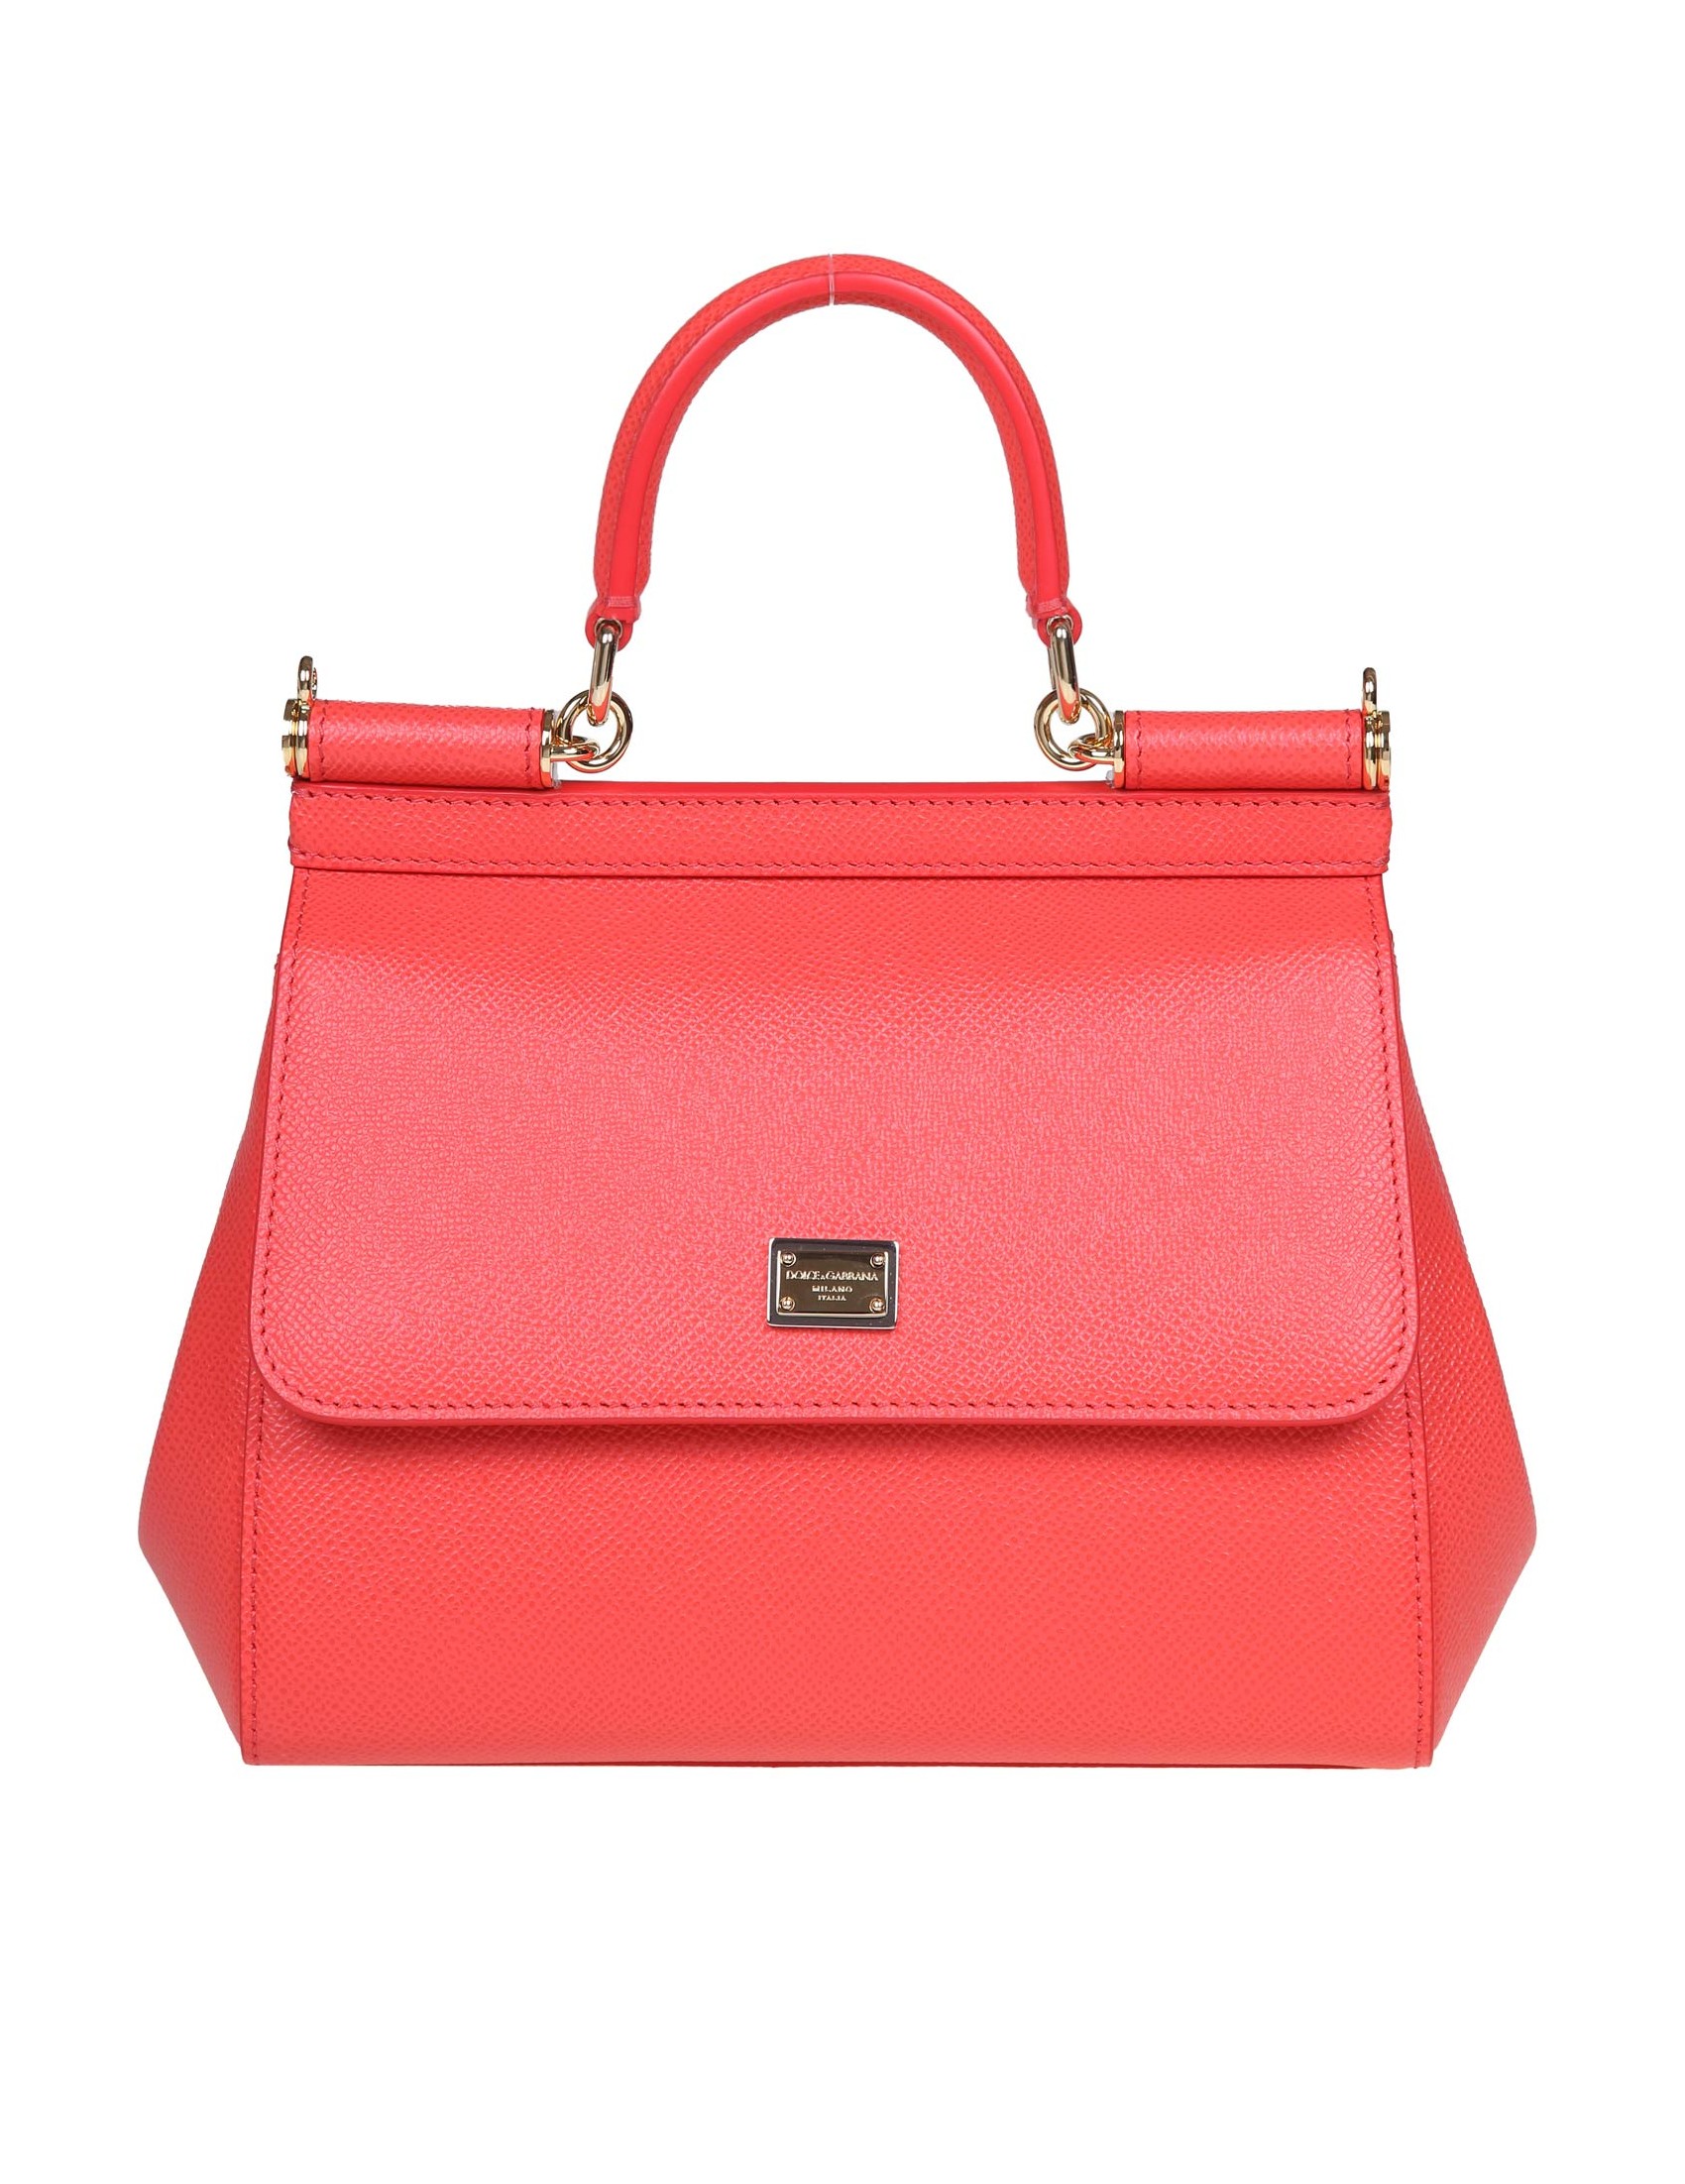 DOLCE & GABBANA SMALL SICILY BAG IN CORAL DAUPHINE LEATHER